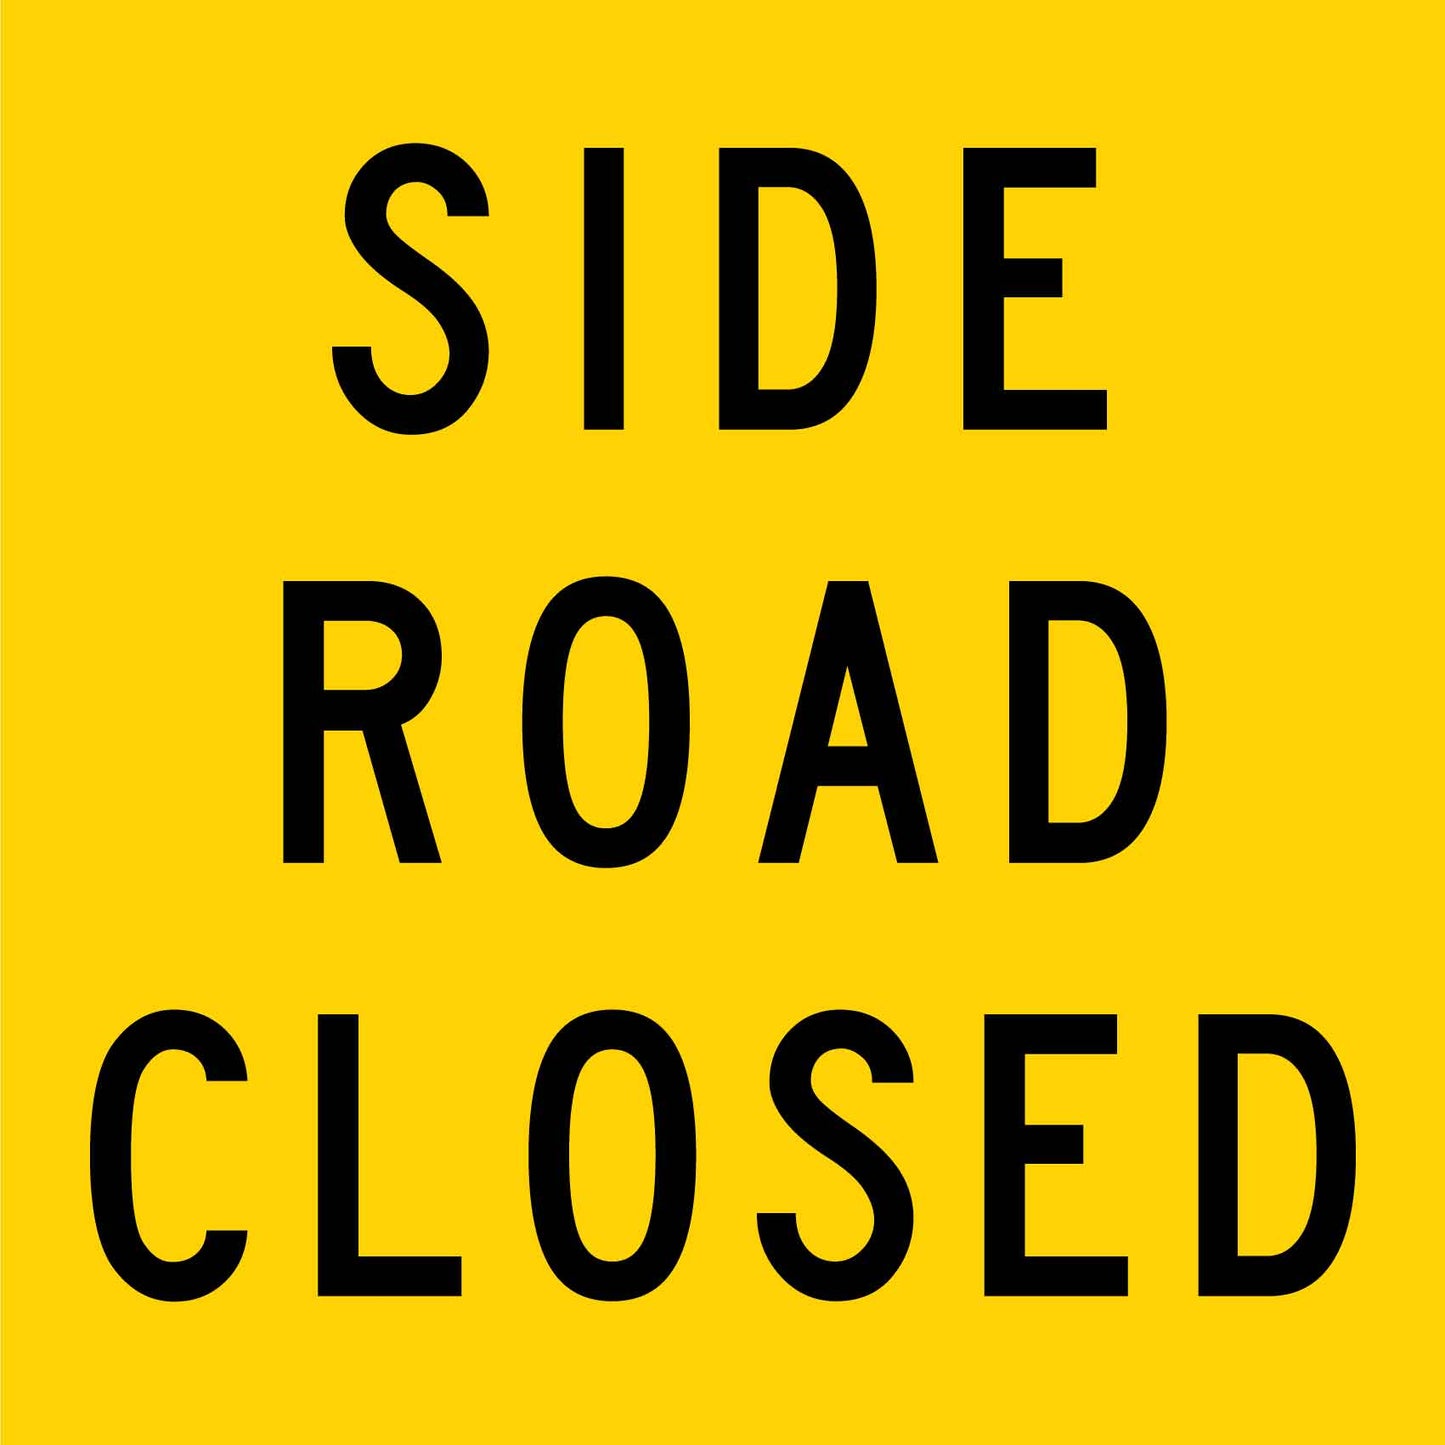 Side Road Closed Multi Message Traffic Sign